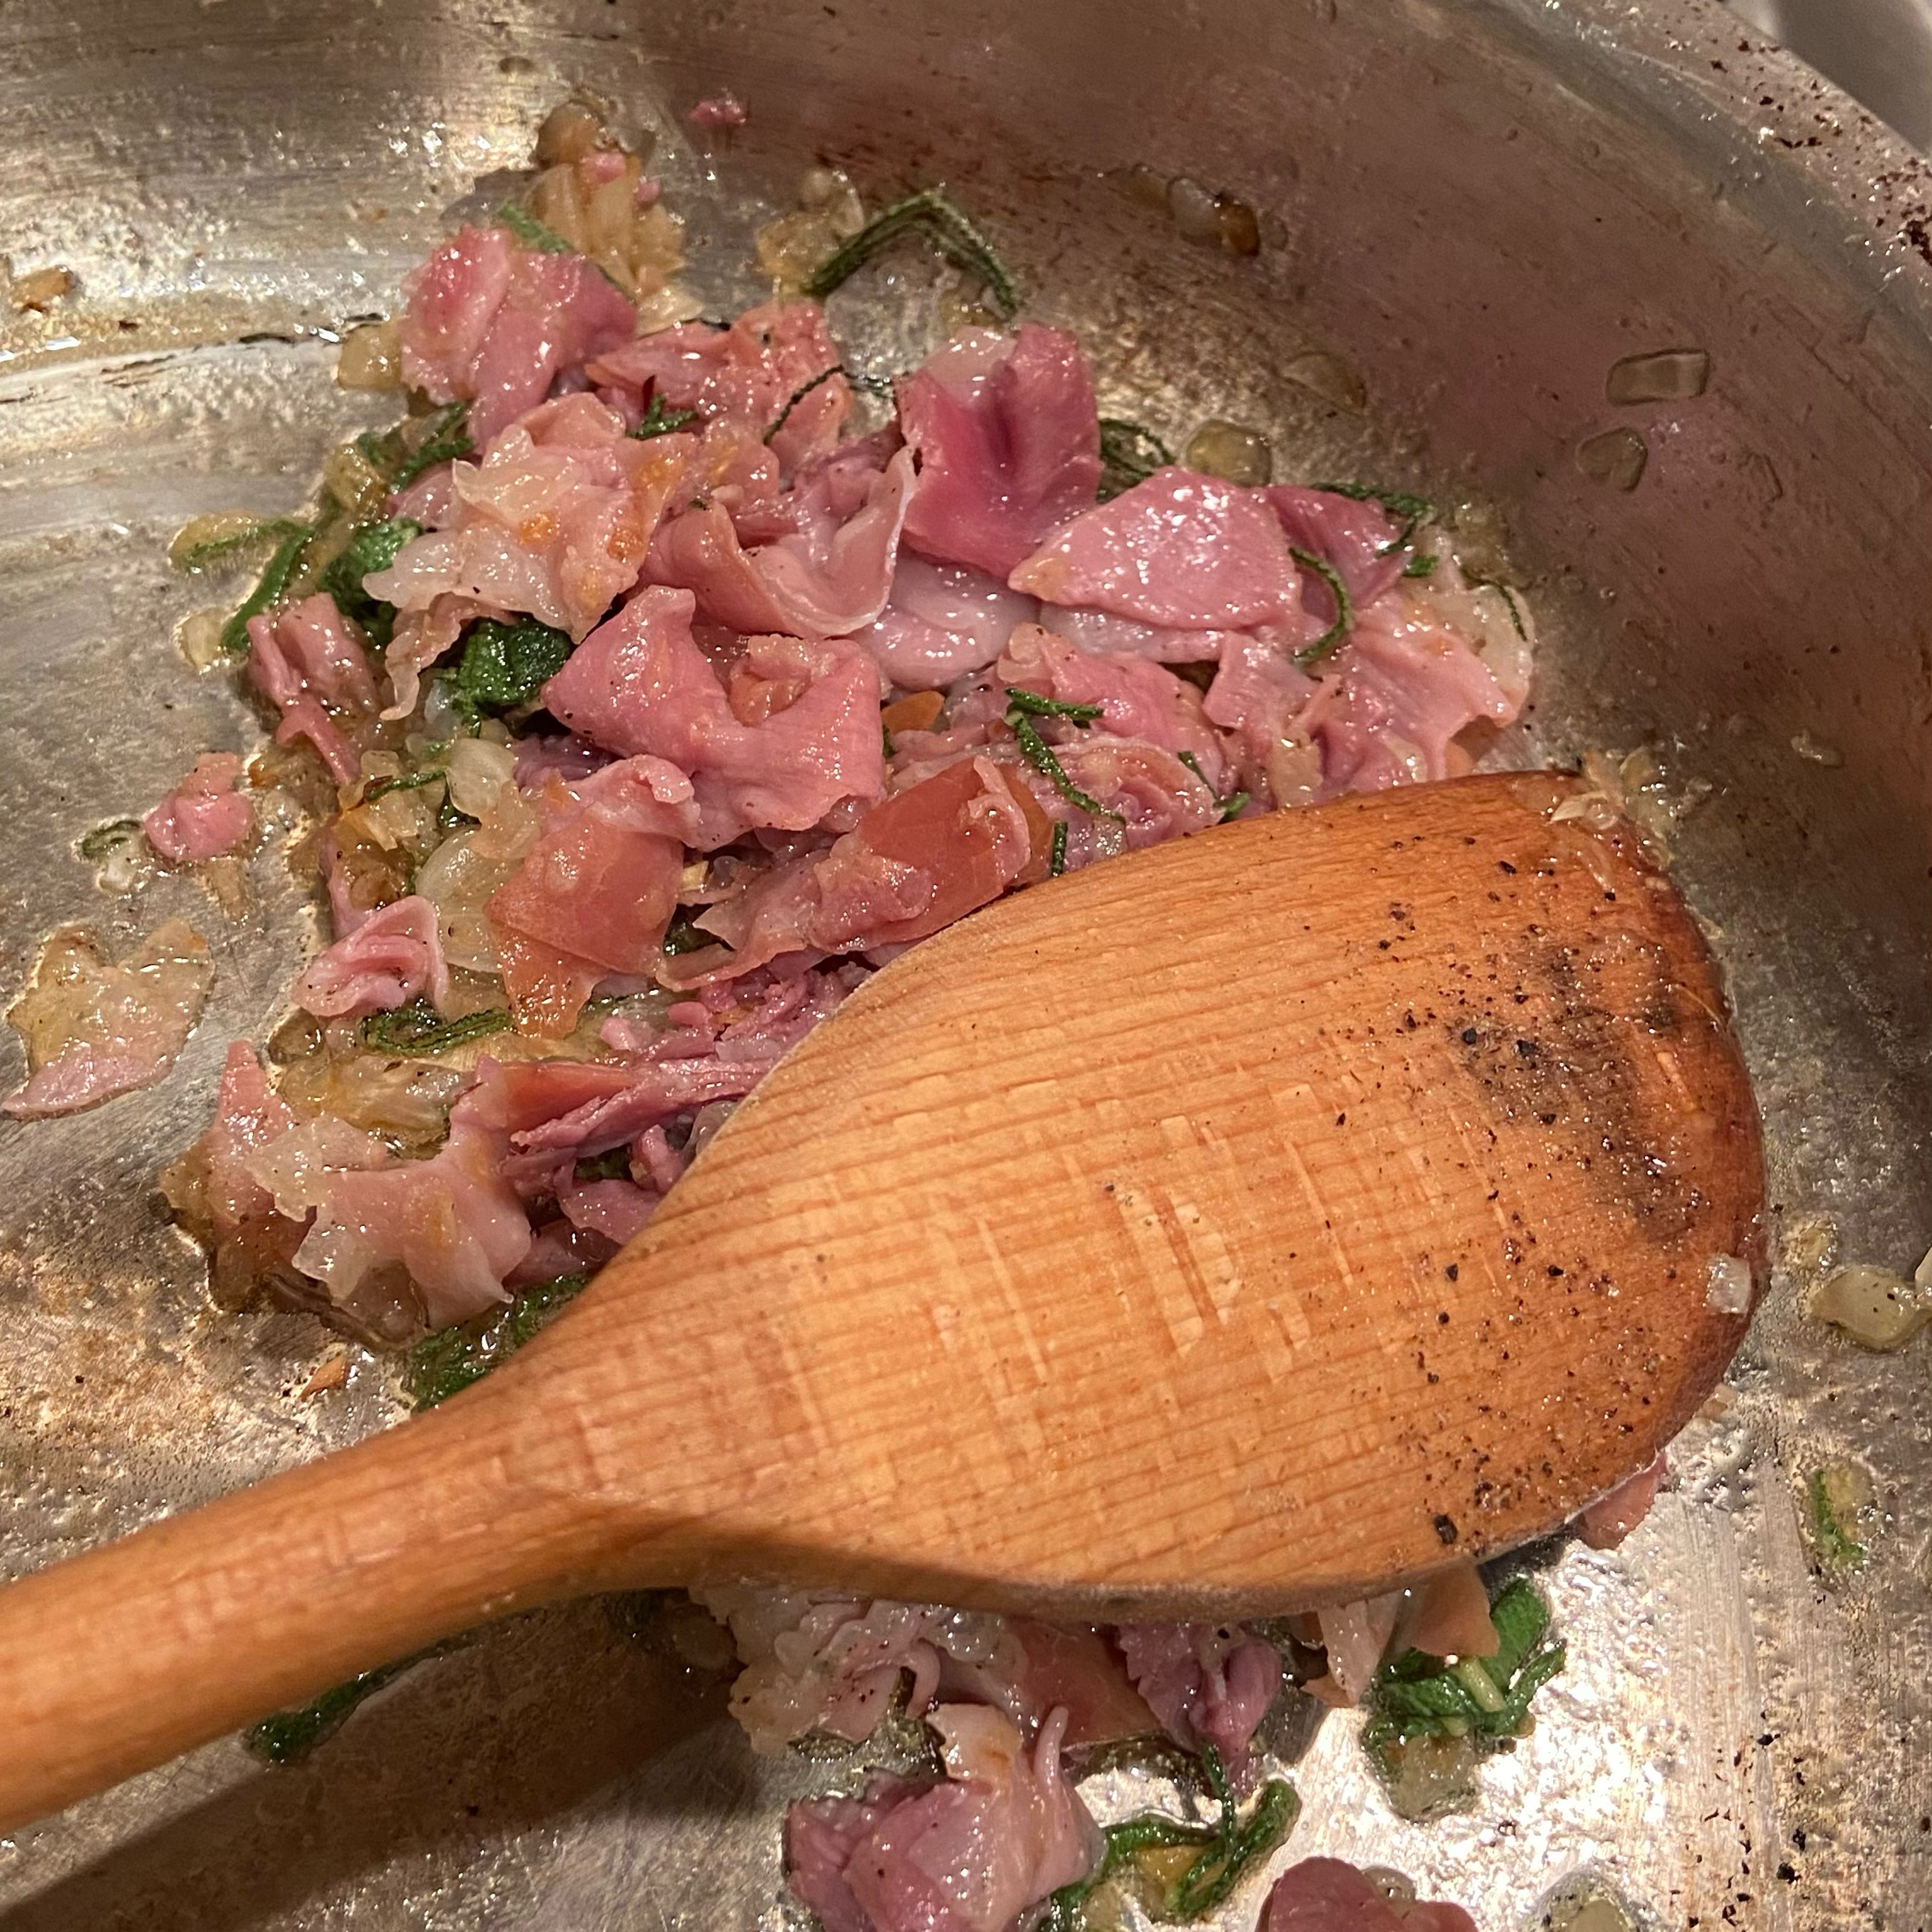 Add your cut sage to the meat and stir around a little. You might want to add a little more butter here and season with pepper. You don’t need to add salt as the meat is salty and the pasta is cooked in salt.